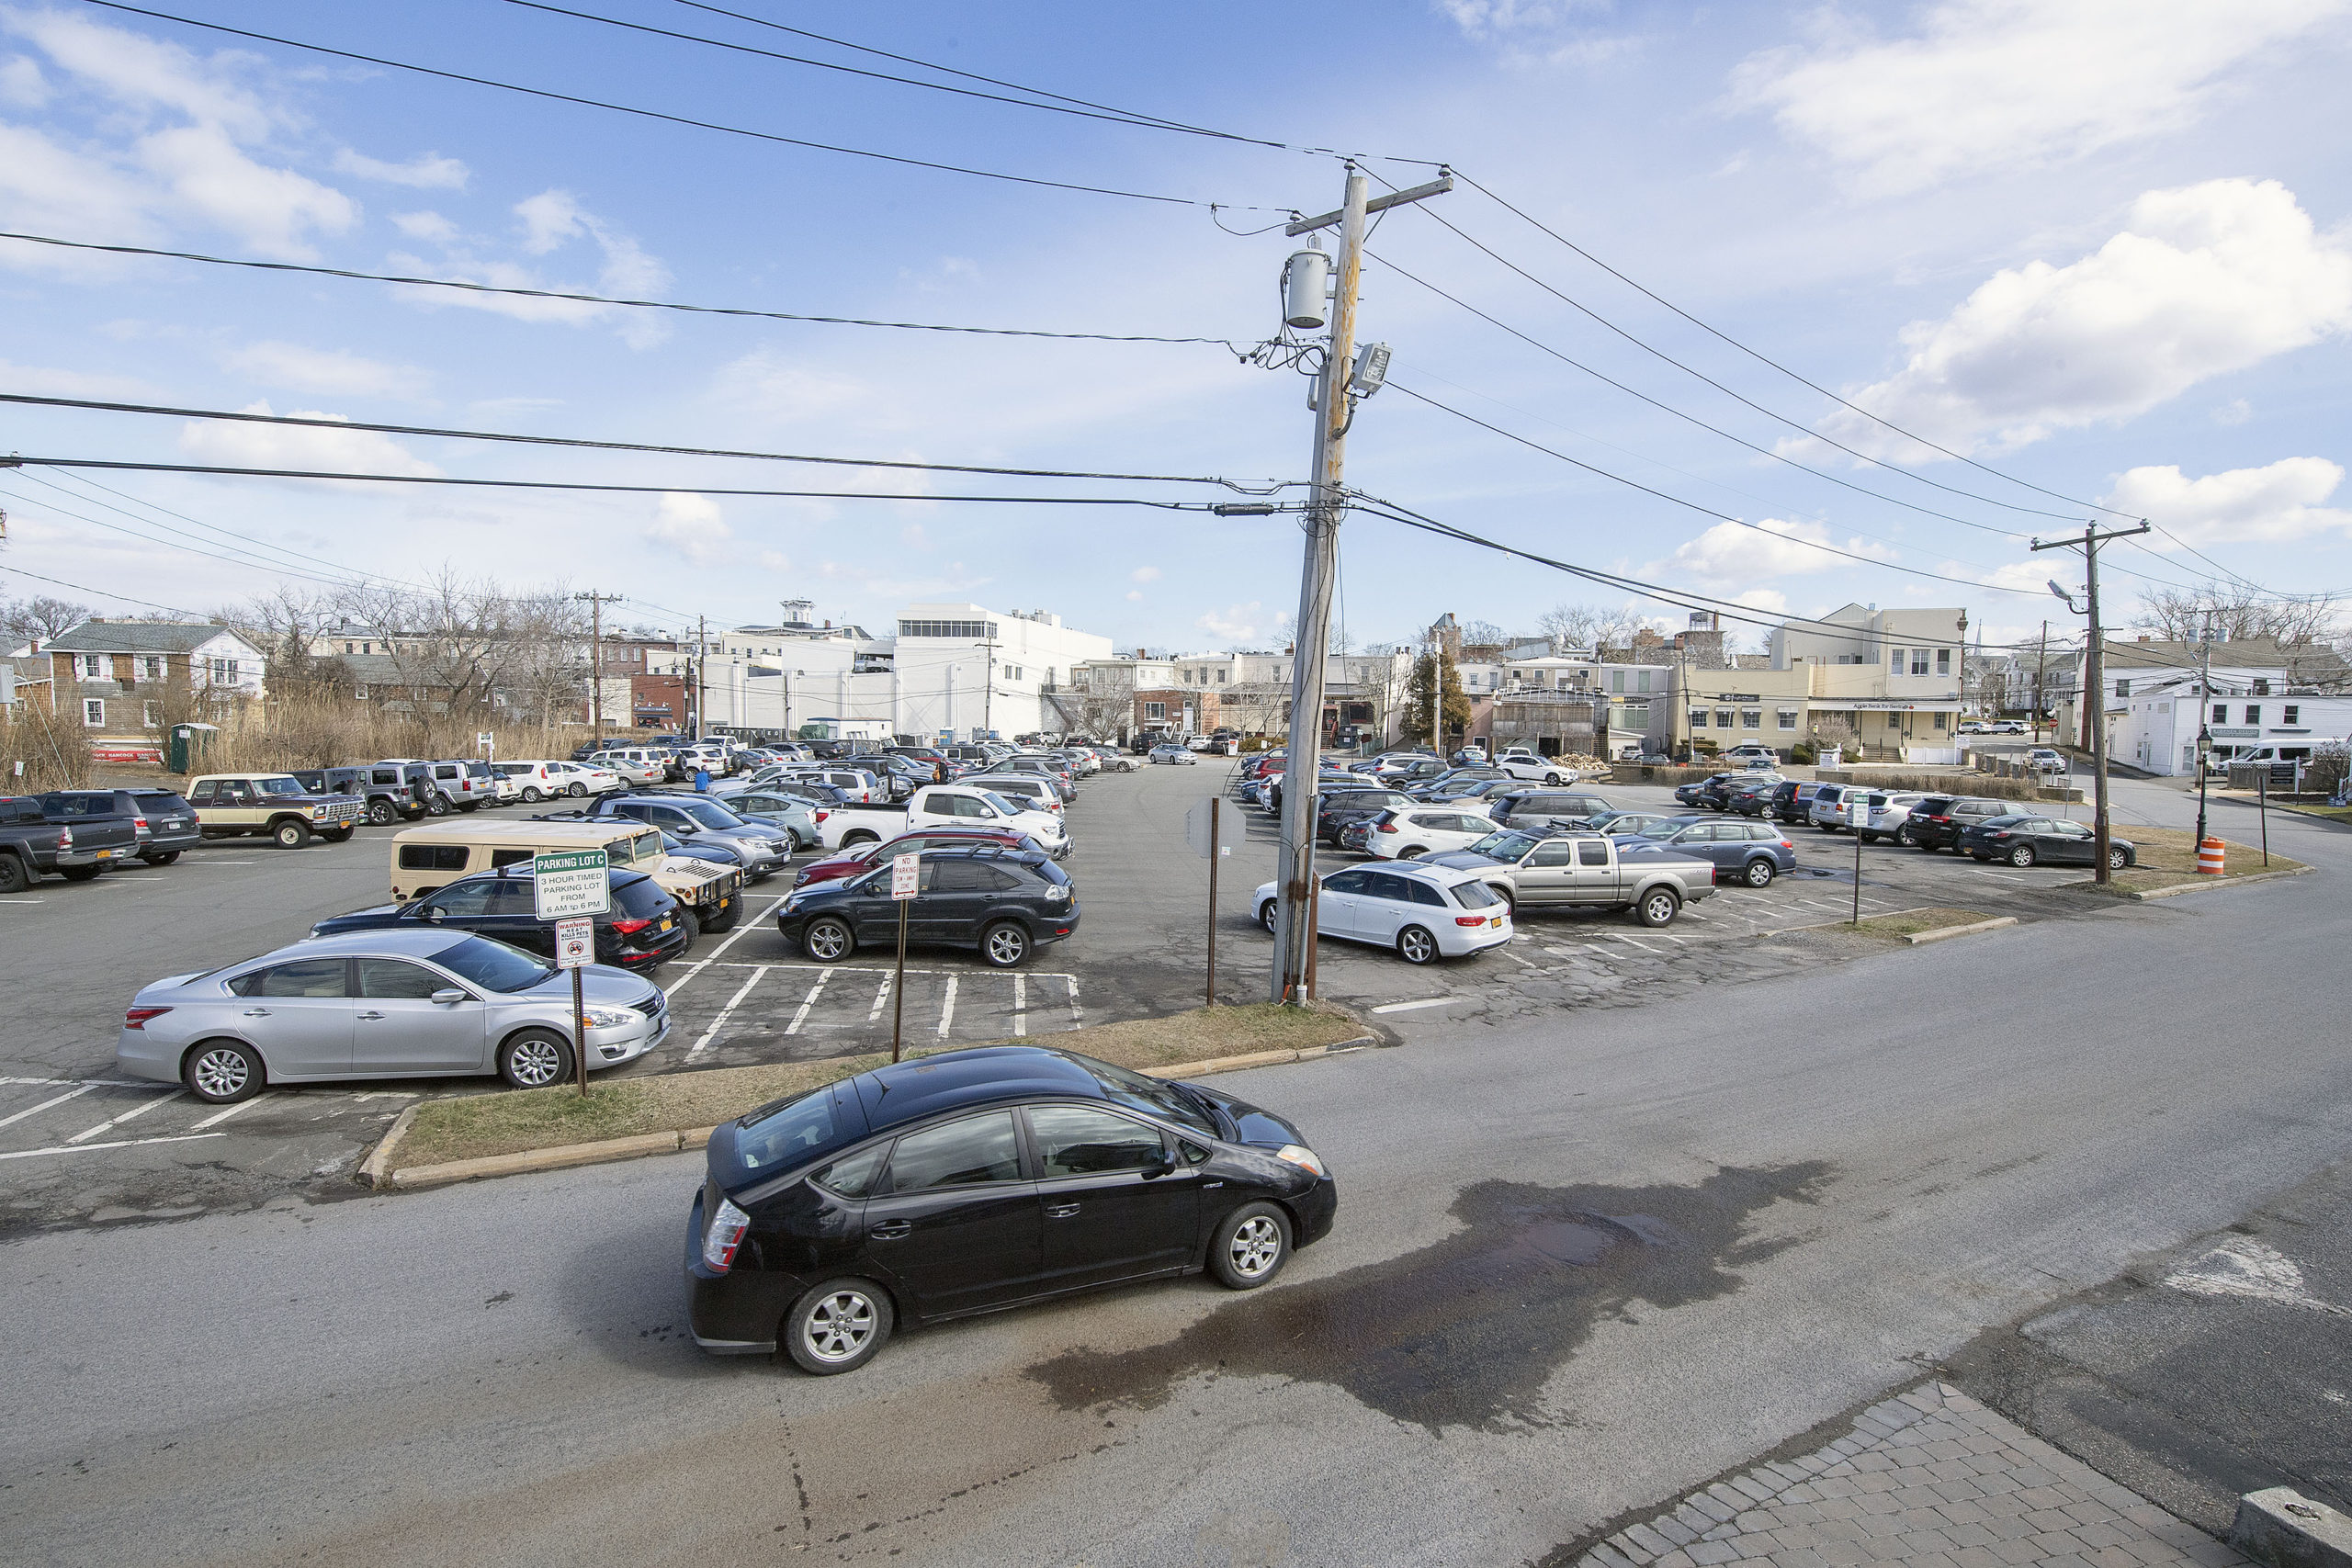 The municipal parking lot on Meadow Street could be reserved for residents only if a parking plan is adopted by the Sag Harbor Village Board. MICHAEL HELLER